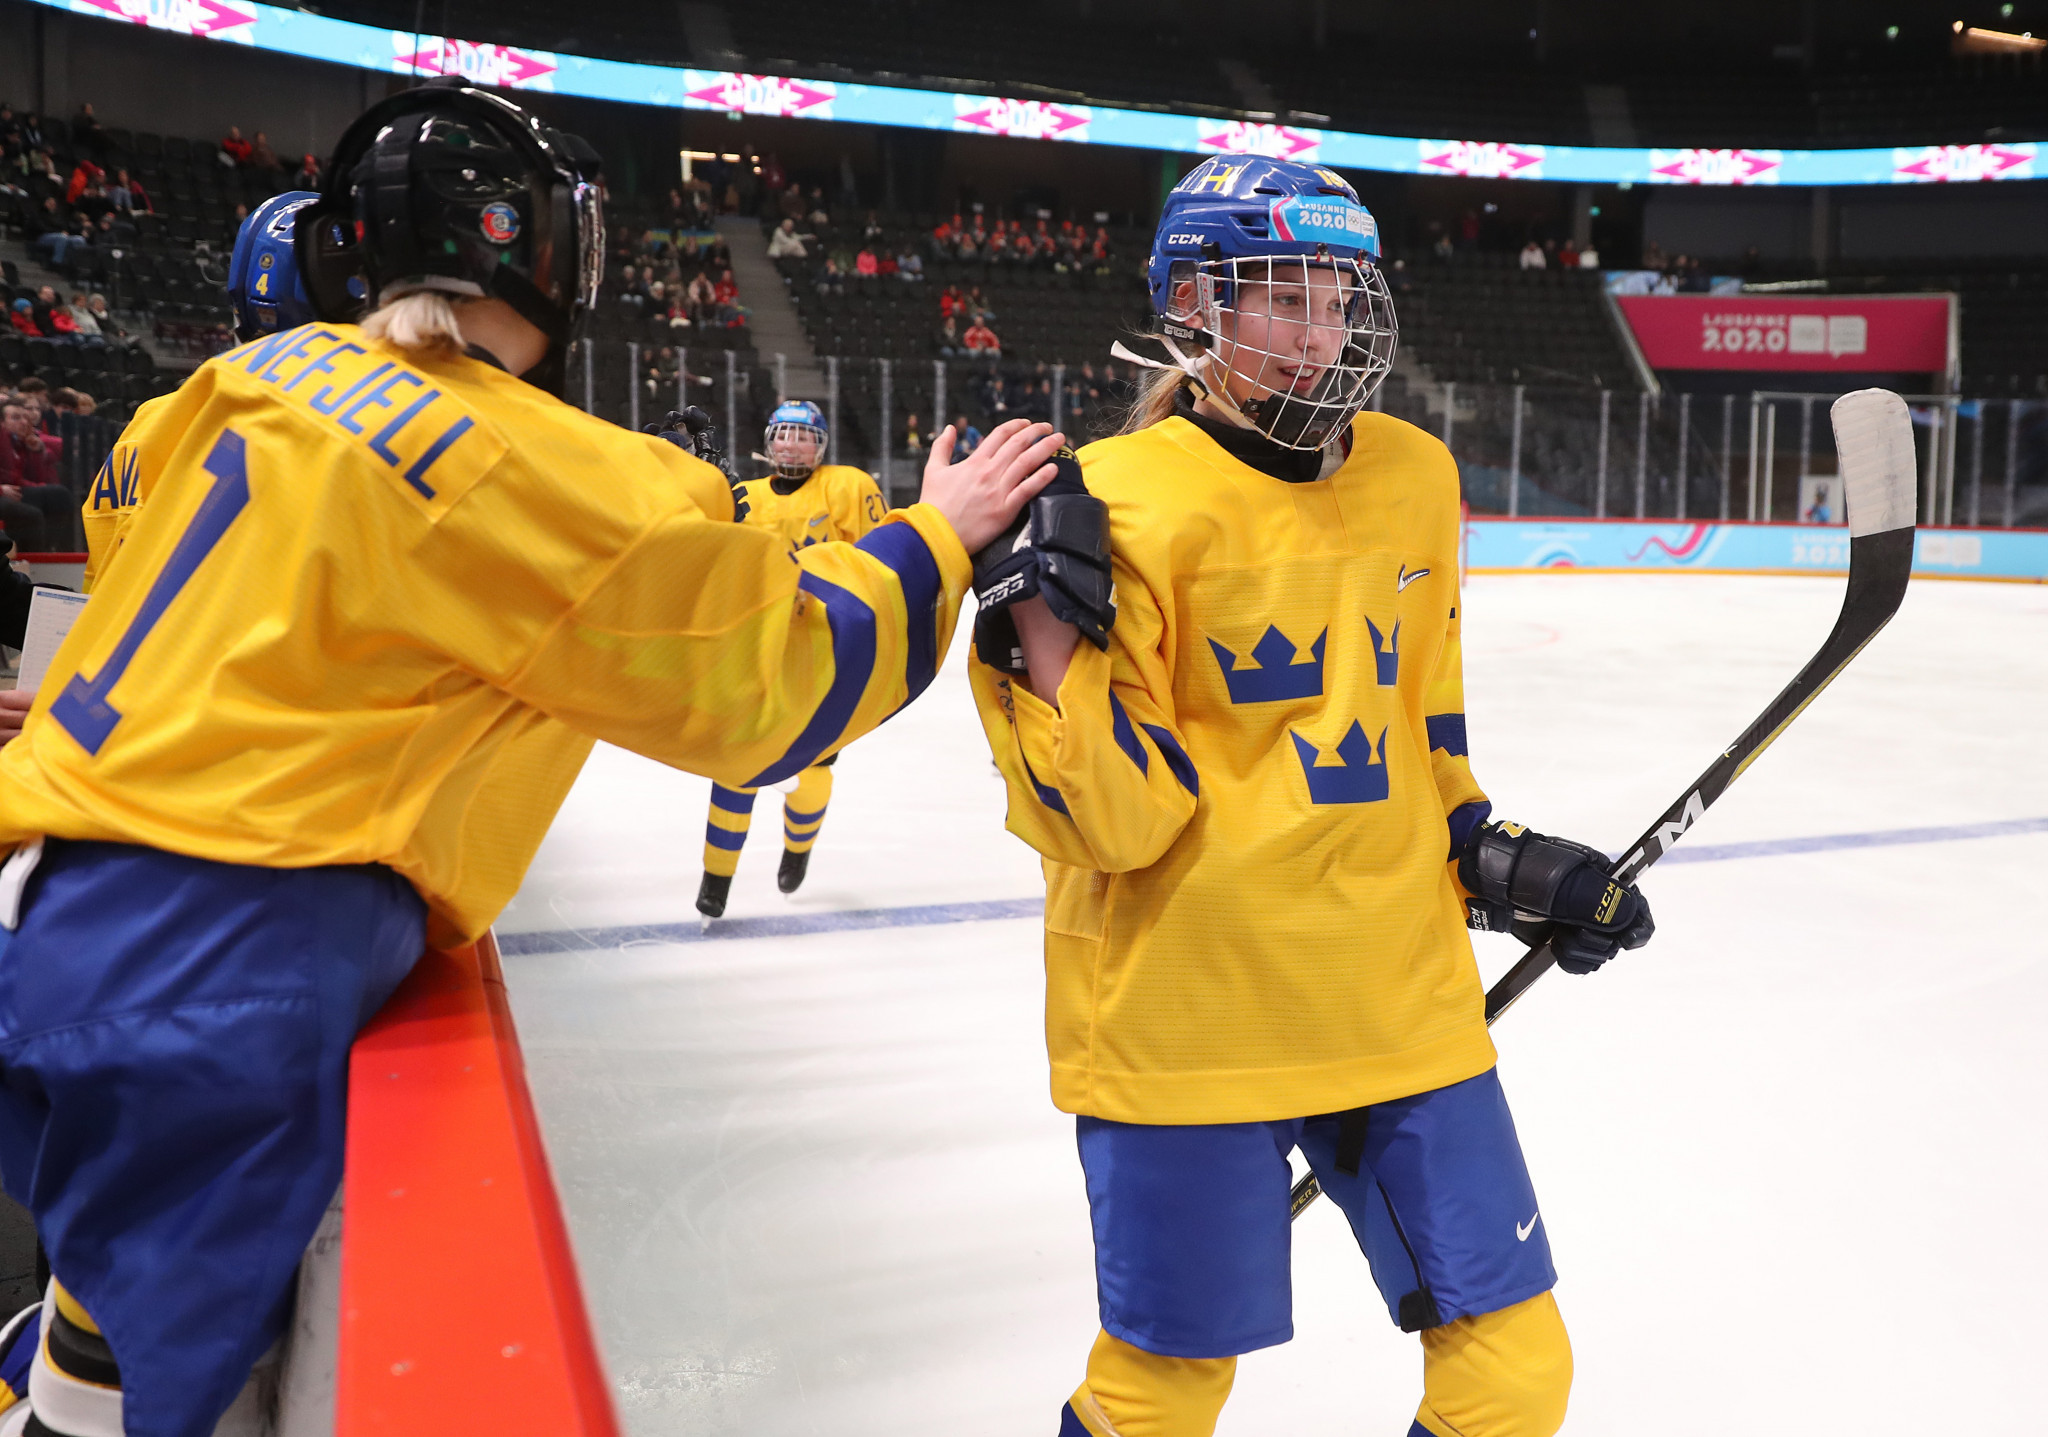 Sweden are among the favourites to qualify for the women's ice hockey competition at Beijing 2022, with 12 teams vying for three spots ©Getty Images